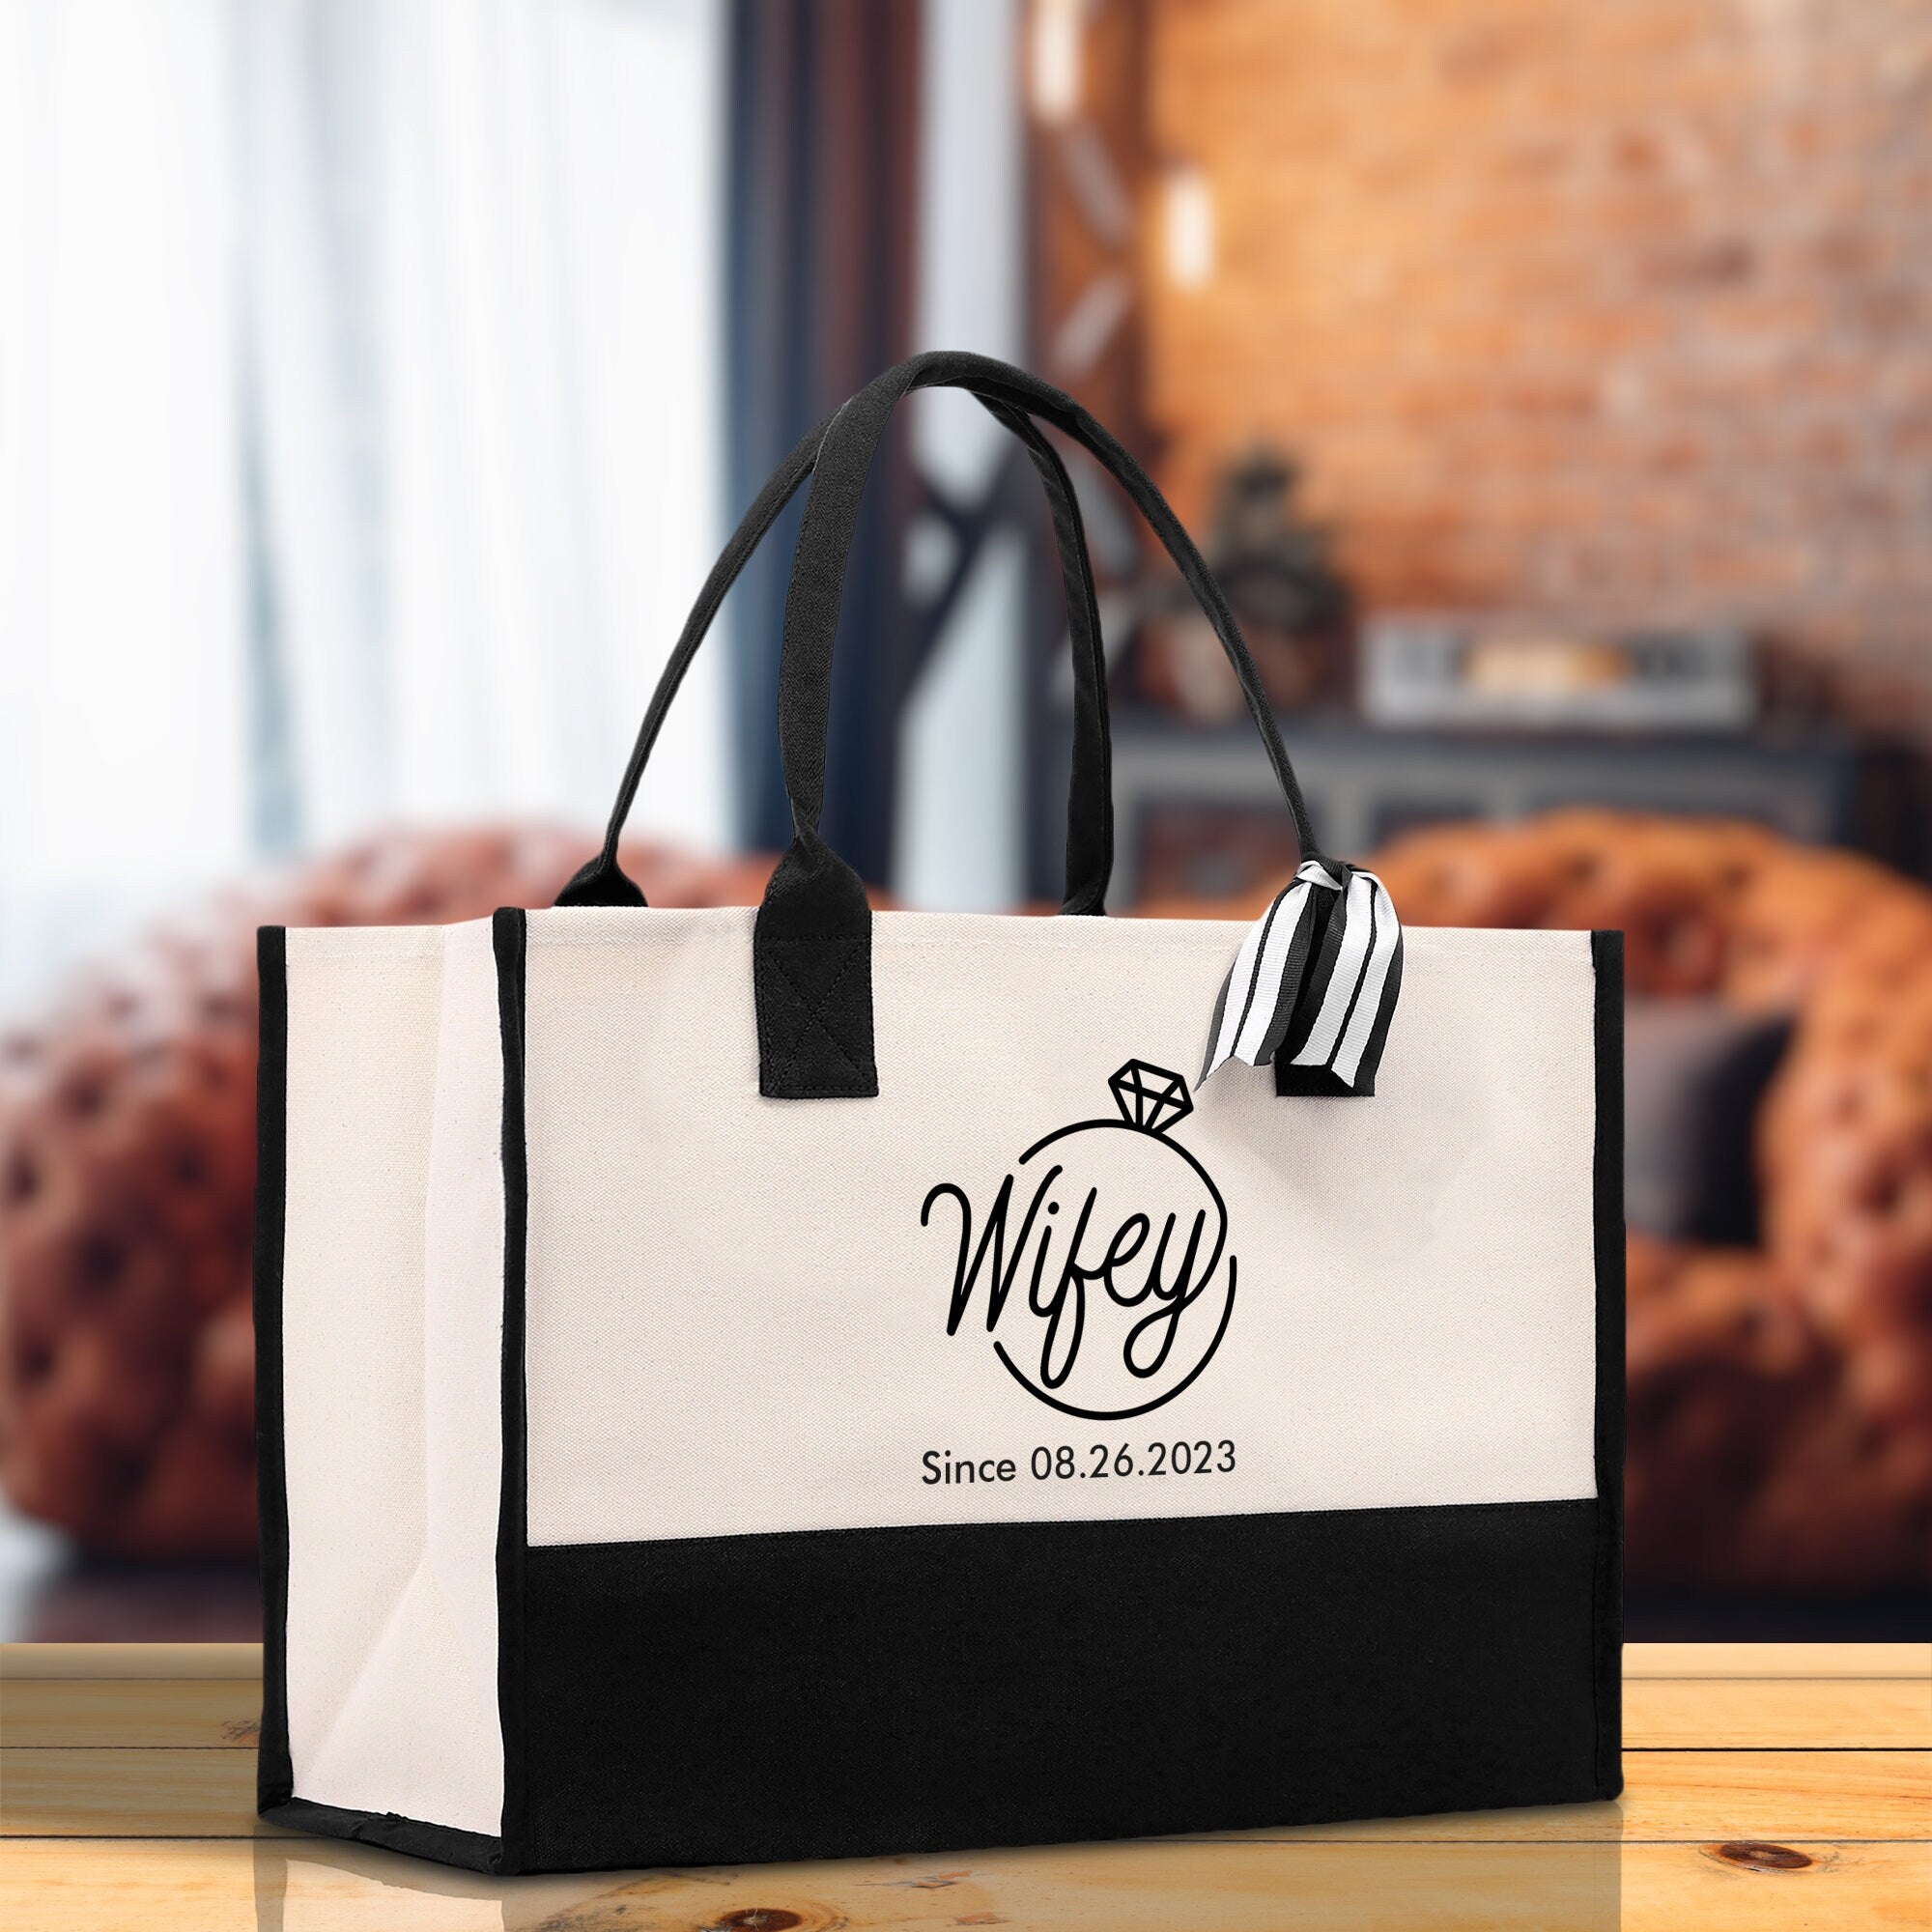 Wifey Personalization Cotton Canvas Tote Bag Bridal Party Tote Anniversary Gift For Wife Honeymoon Tote Est Year Tote Bag Engagement Gift